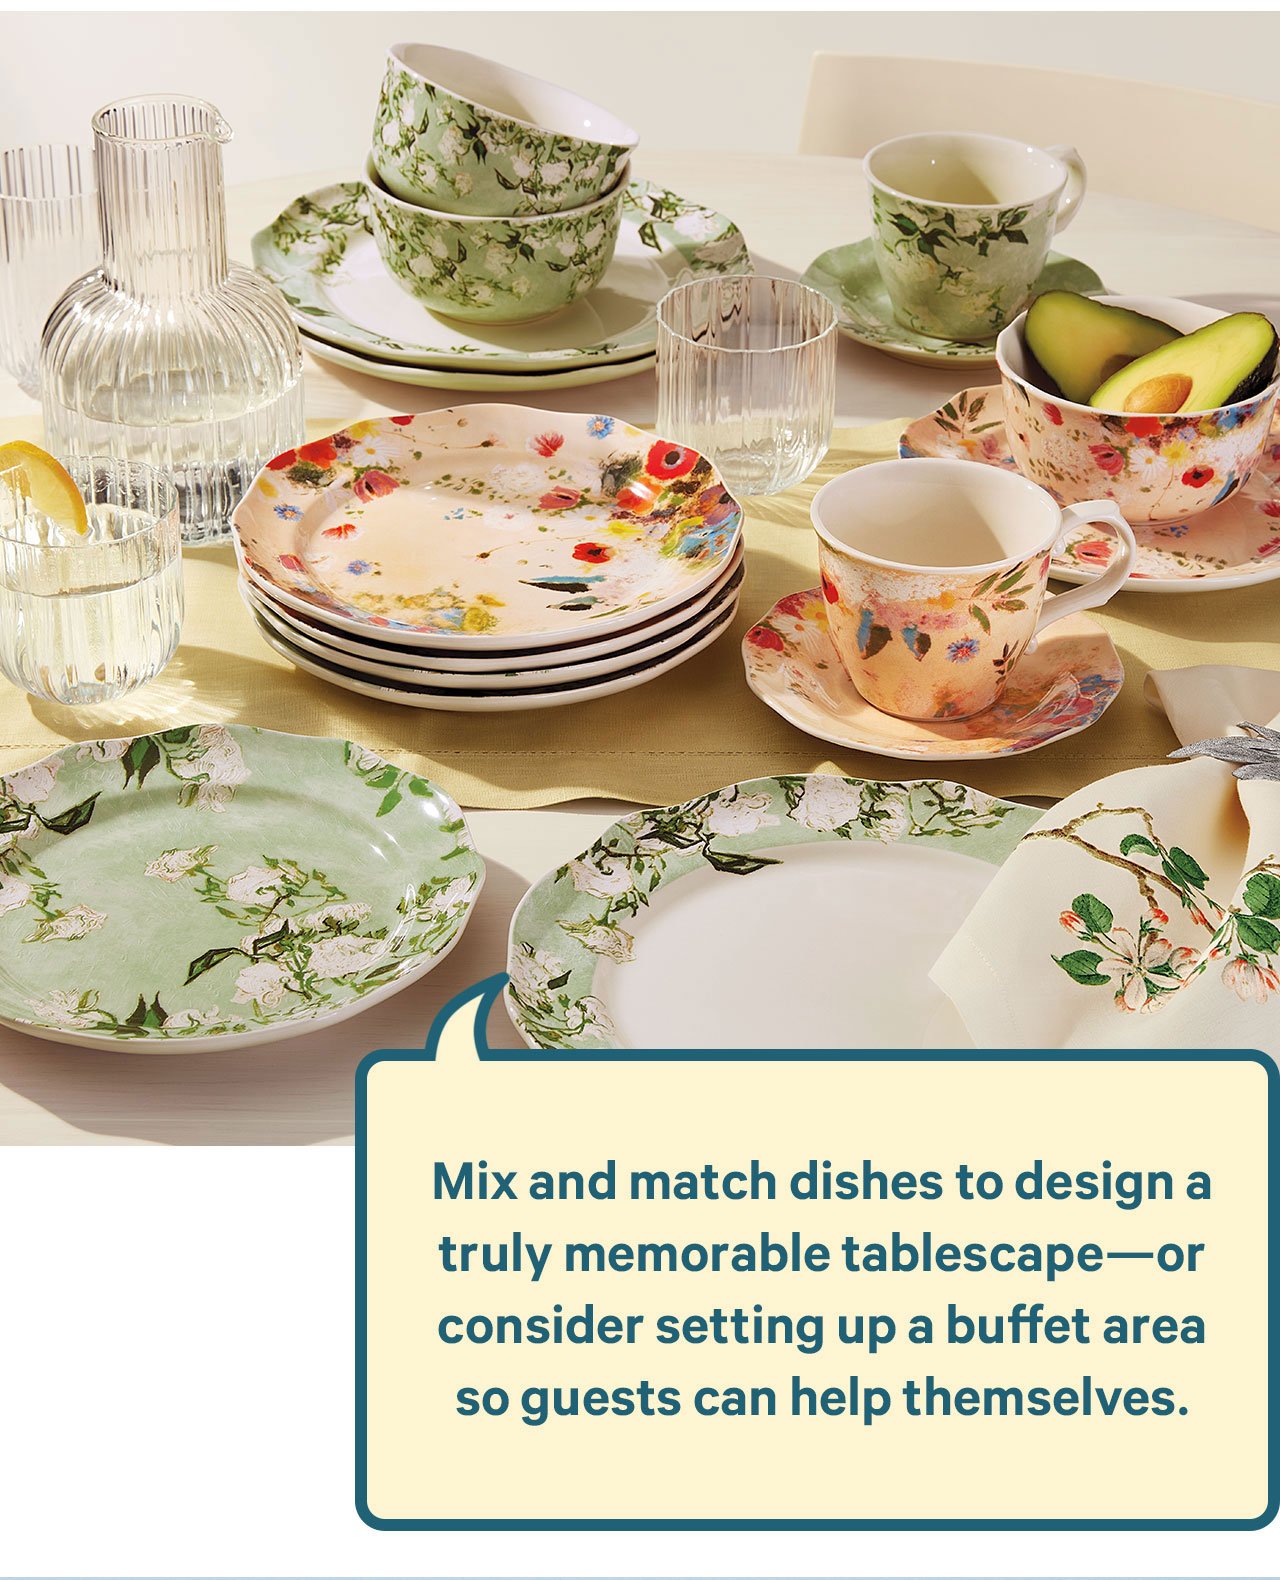 Mix and match dishes to design a truly memorable tablescape - or consider setting up a buffet area so guests can help themselves.